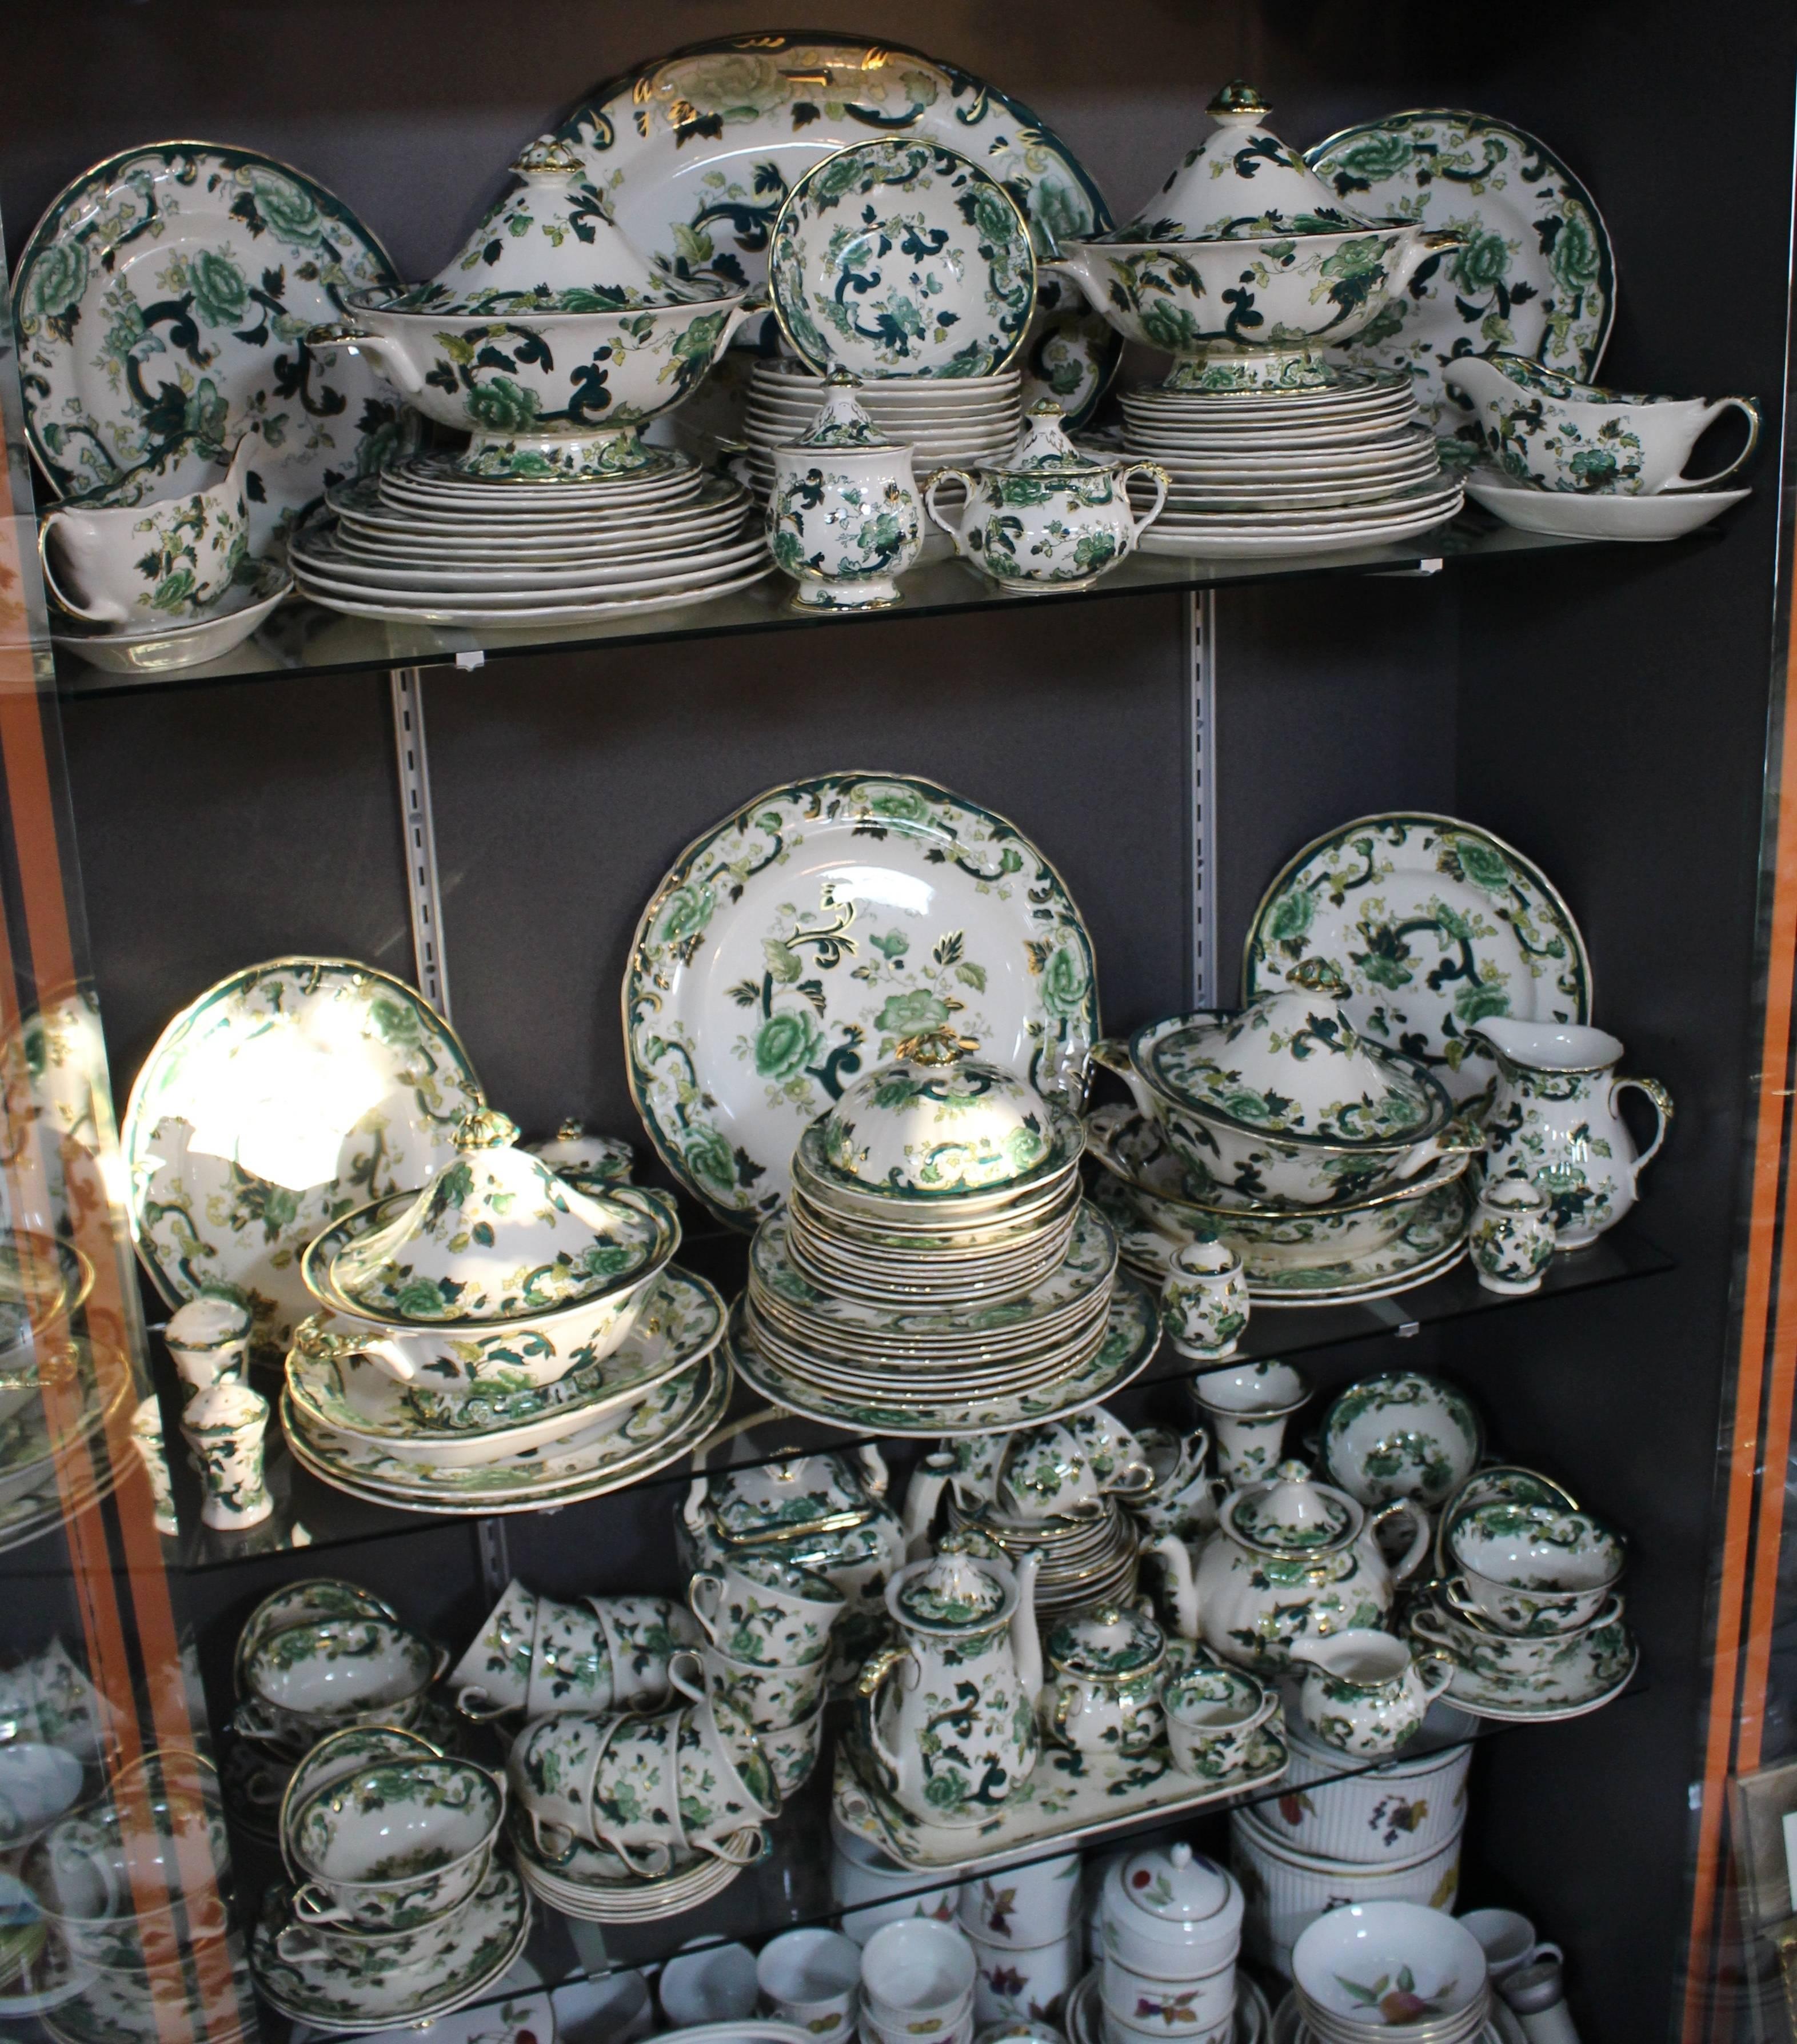 Manufacturer Mason's
Pattern ironstone - Chartreuse
Total 176 pieces
Pieces everything pictured: Eight tea cups and saucers, eight coffee cups and saucers, copffee pot, teapot, square teapot, two lidded sugar bowls, small cream jug, large cream